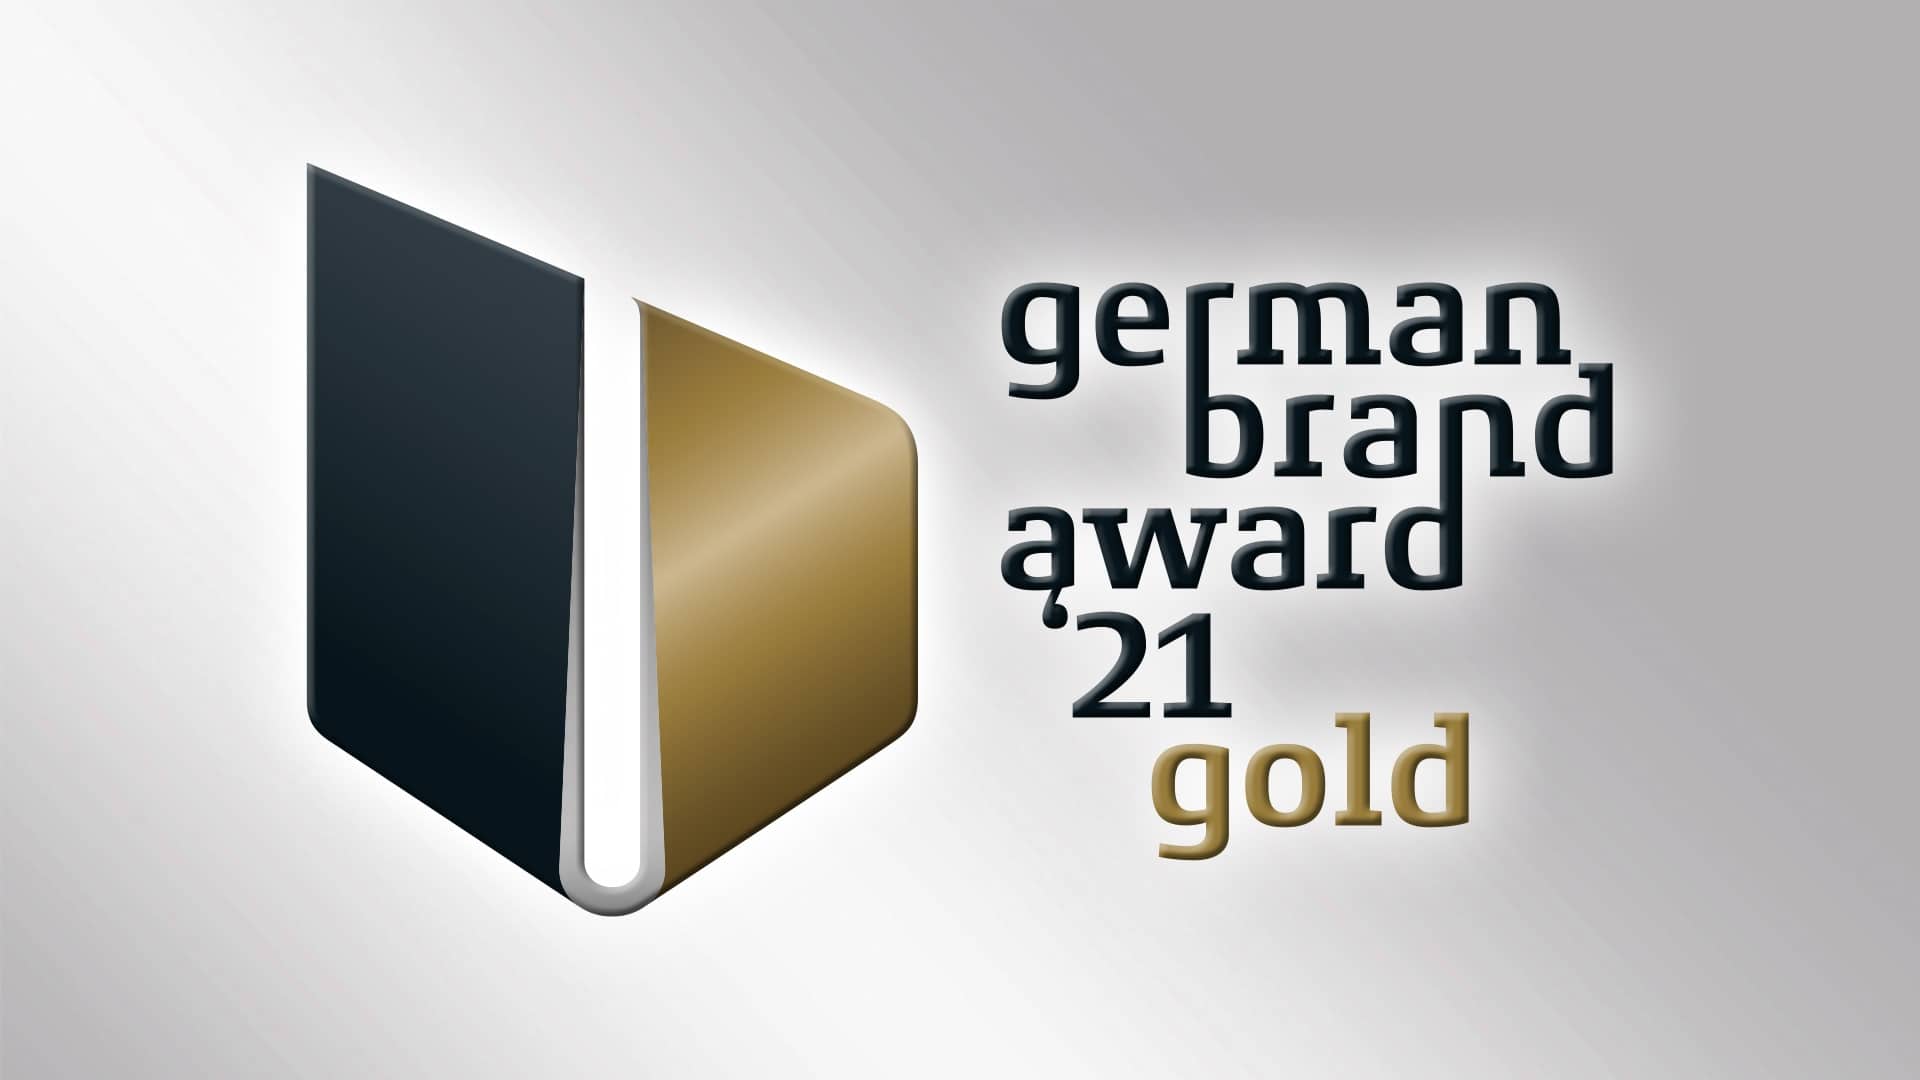 “One Brand” Brings Gold to Knorr-Bremse in German Brand Awards